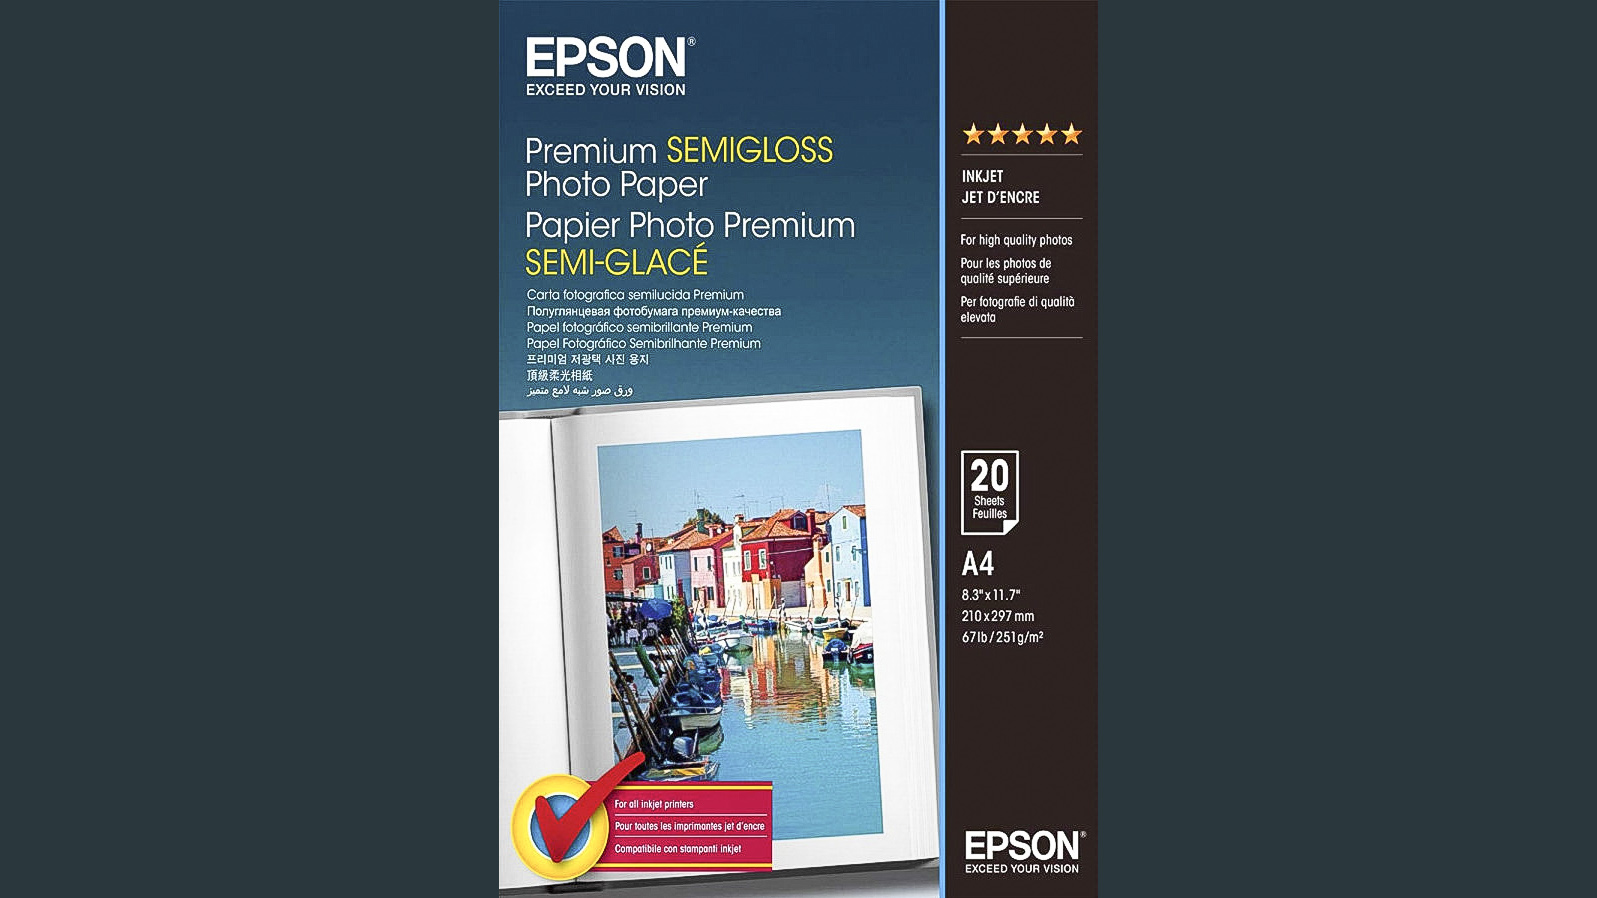 Epson Premium Semi-Gloss, one of the best photo papers